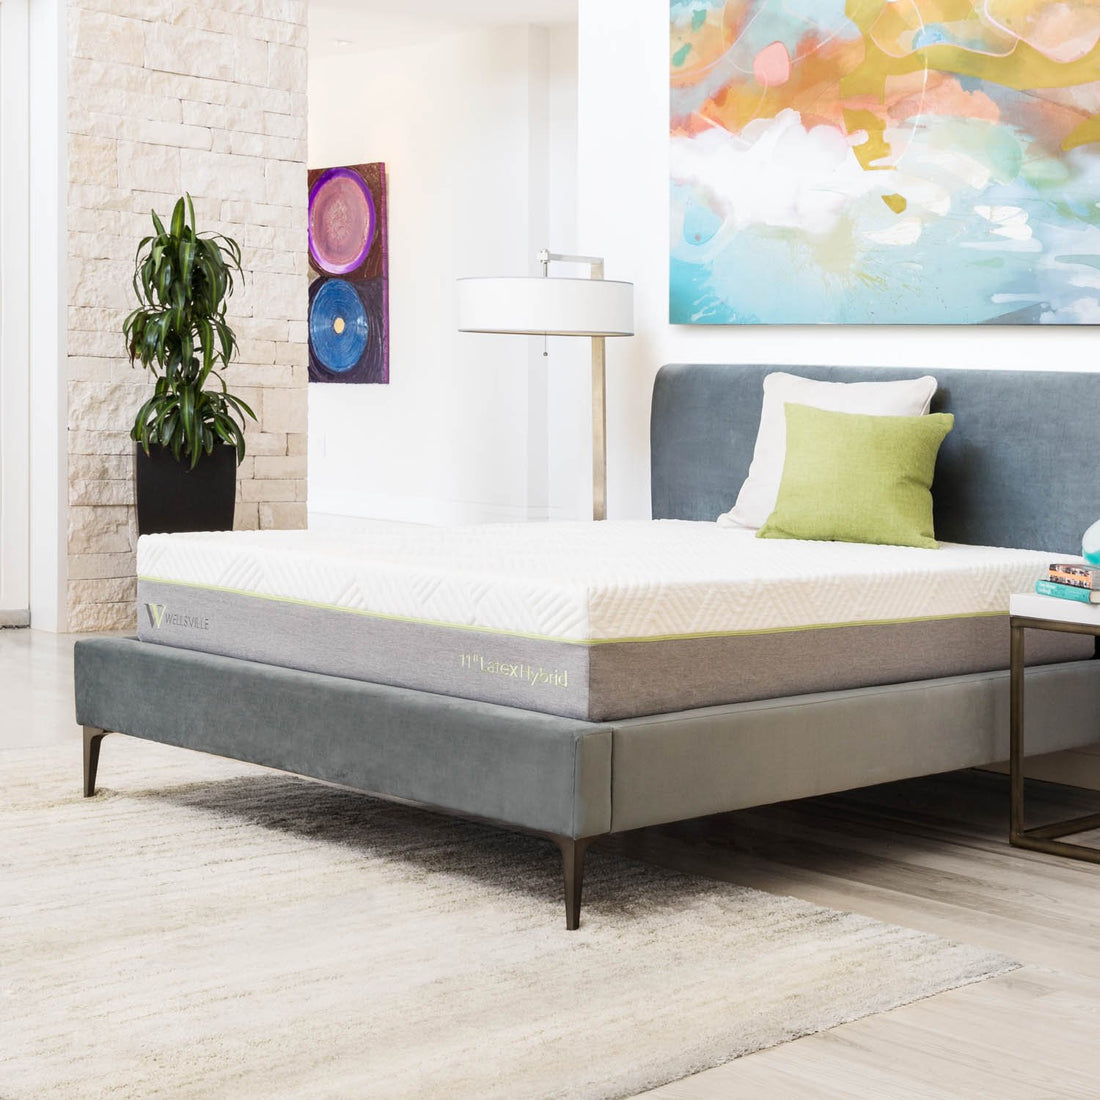 What's the best mattress profile for me?